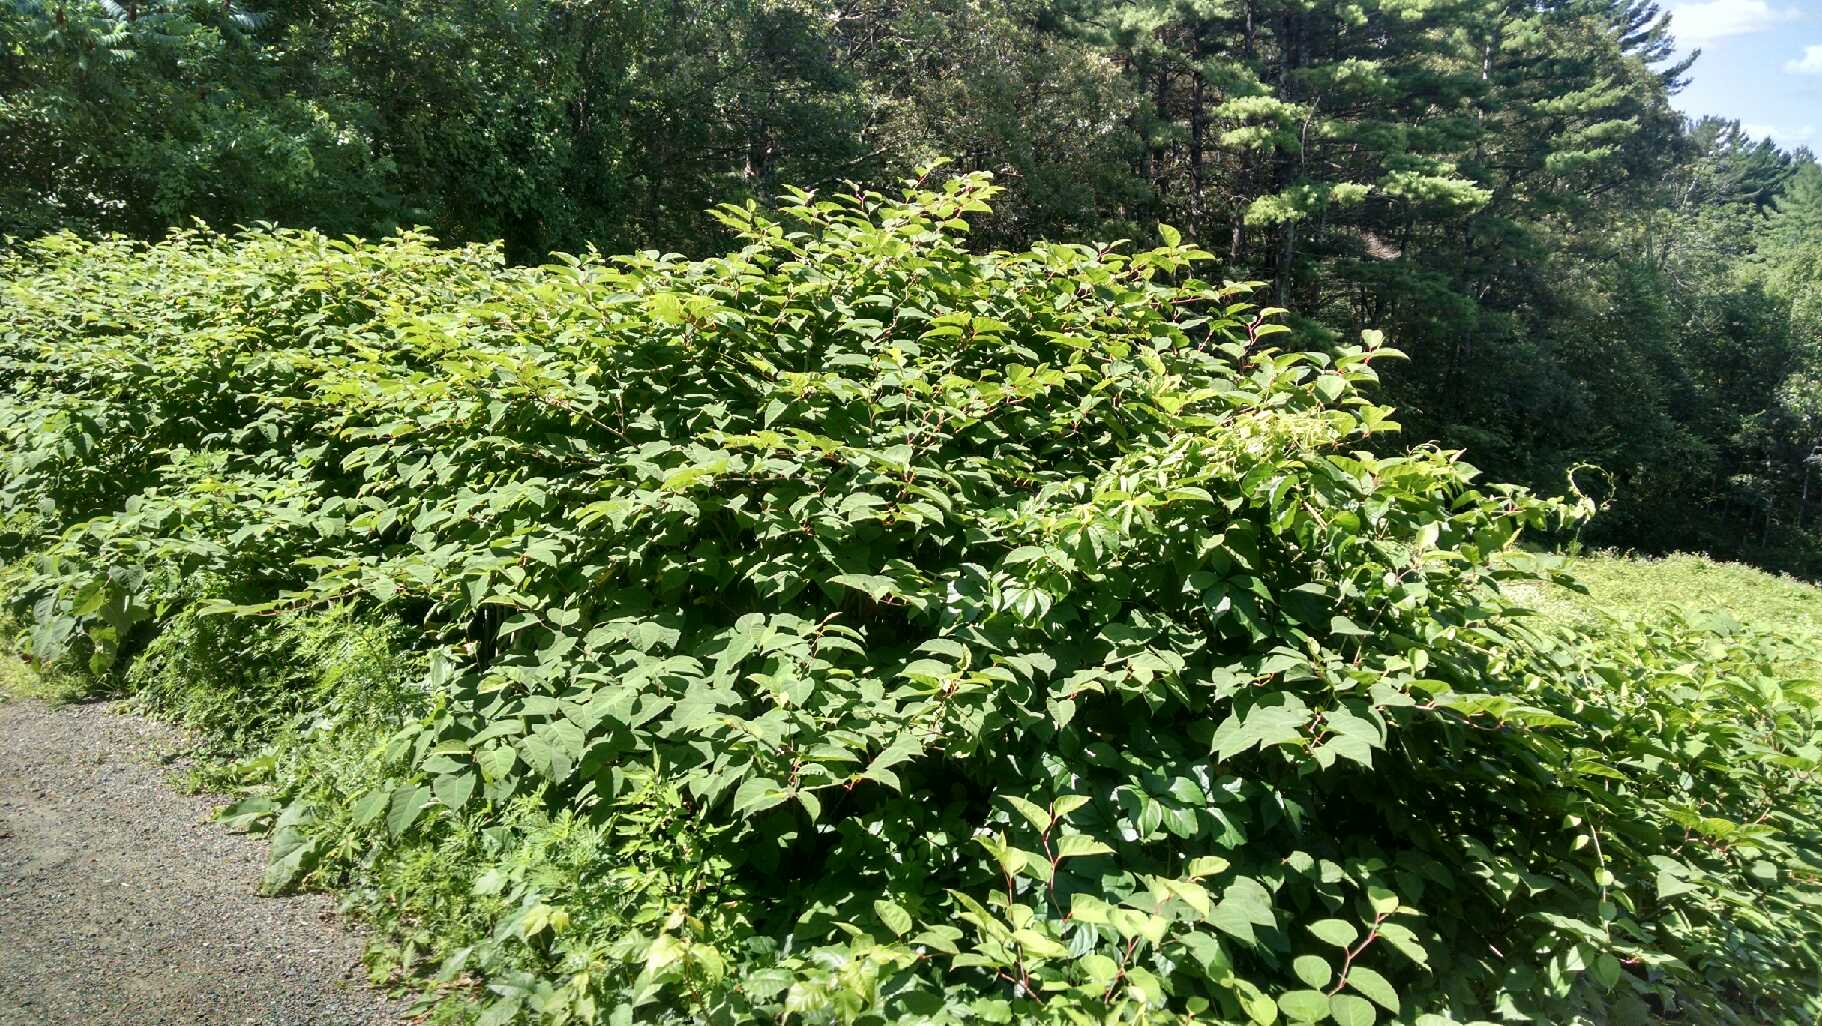 Japanese Knotweed is an aggressively growing herbaceous perennial often occurs in large monocultures and can reach heights of 10 feet.  